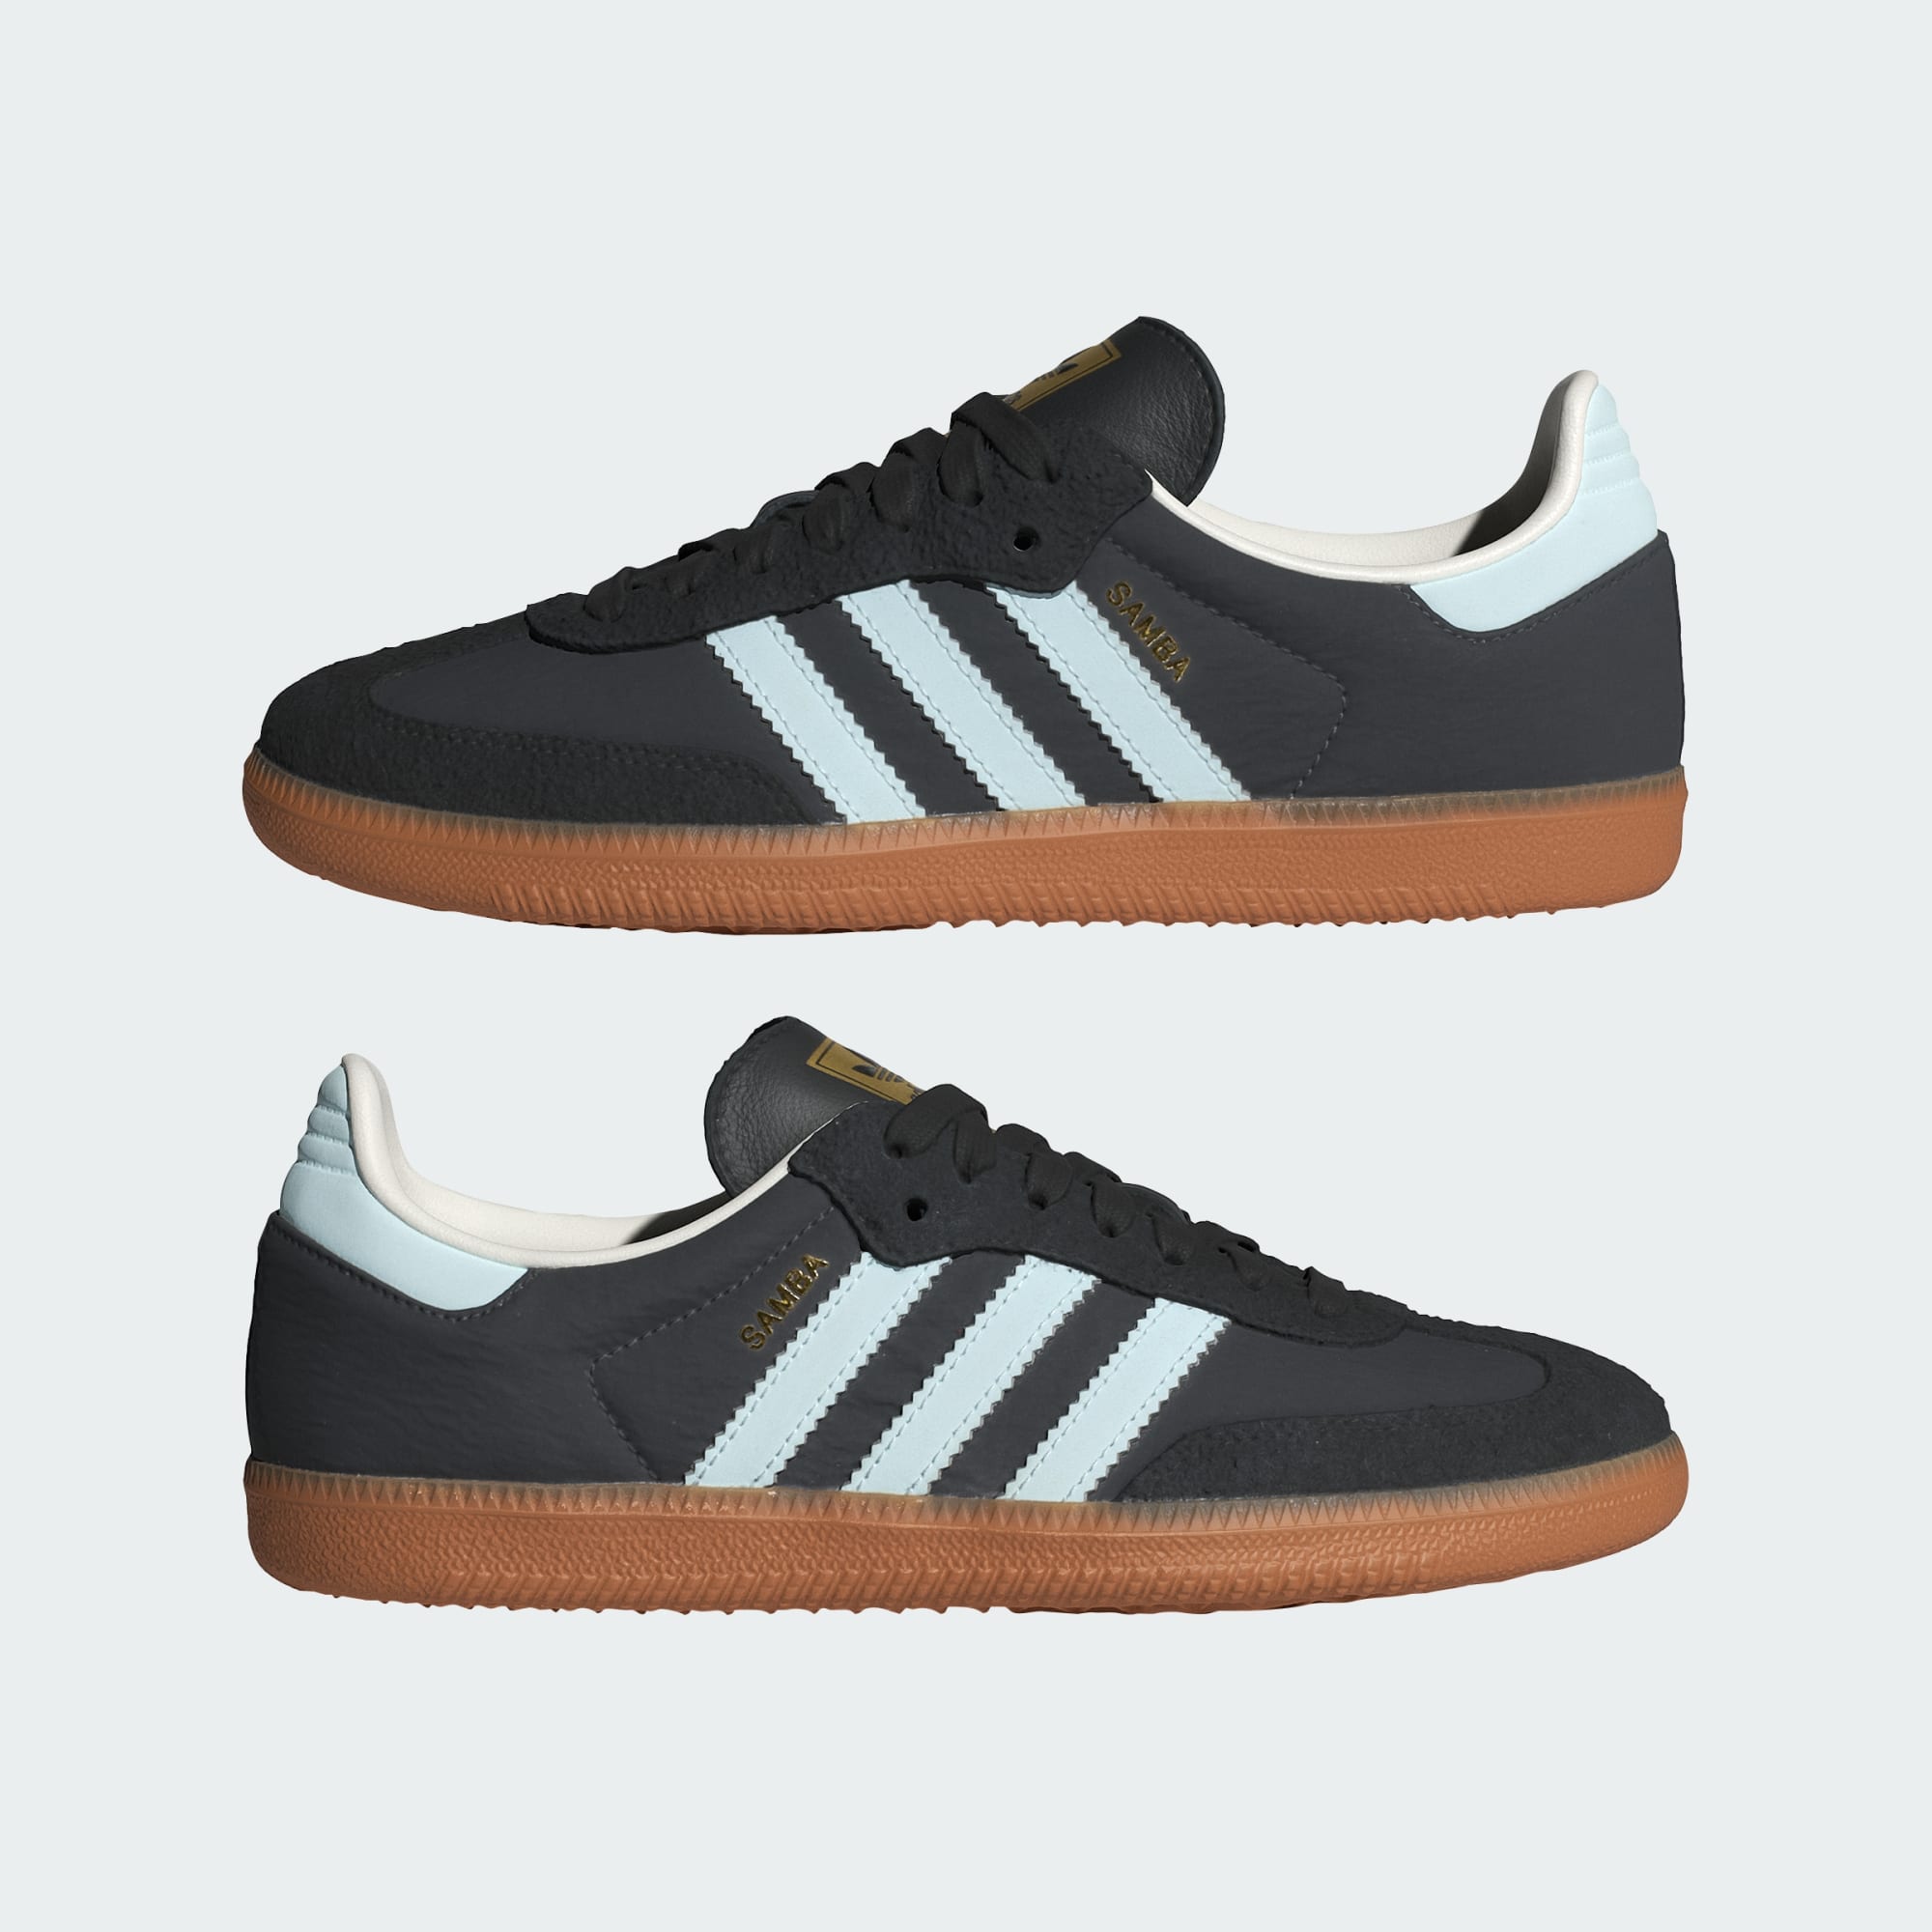 Adidas Carbon and Almost Blue Chalk White Originals Samba Sneakers unisex